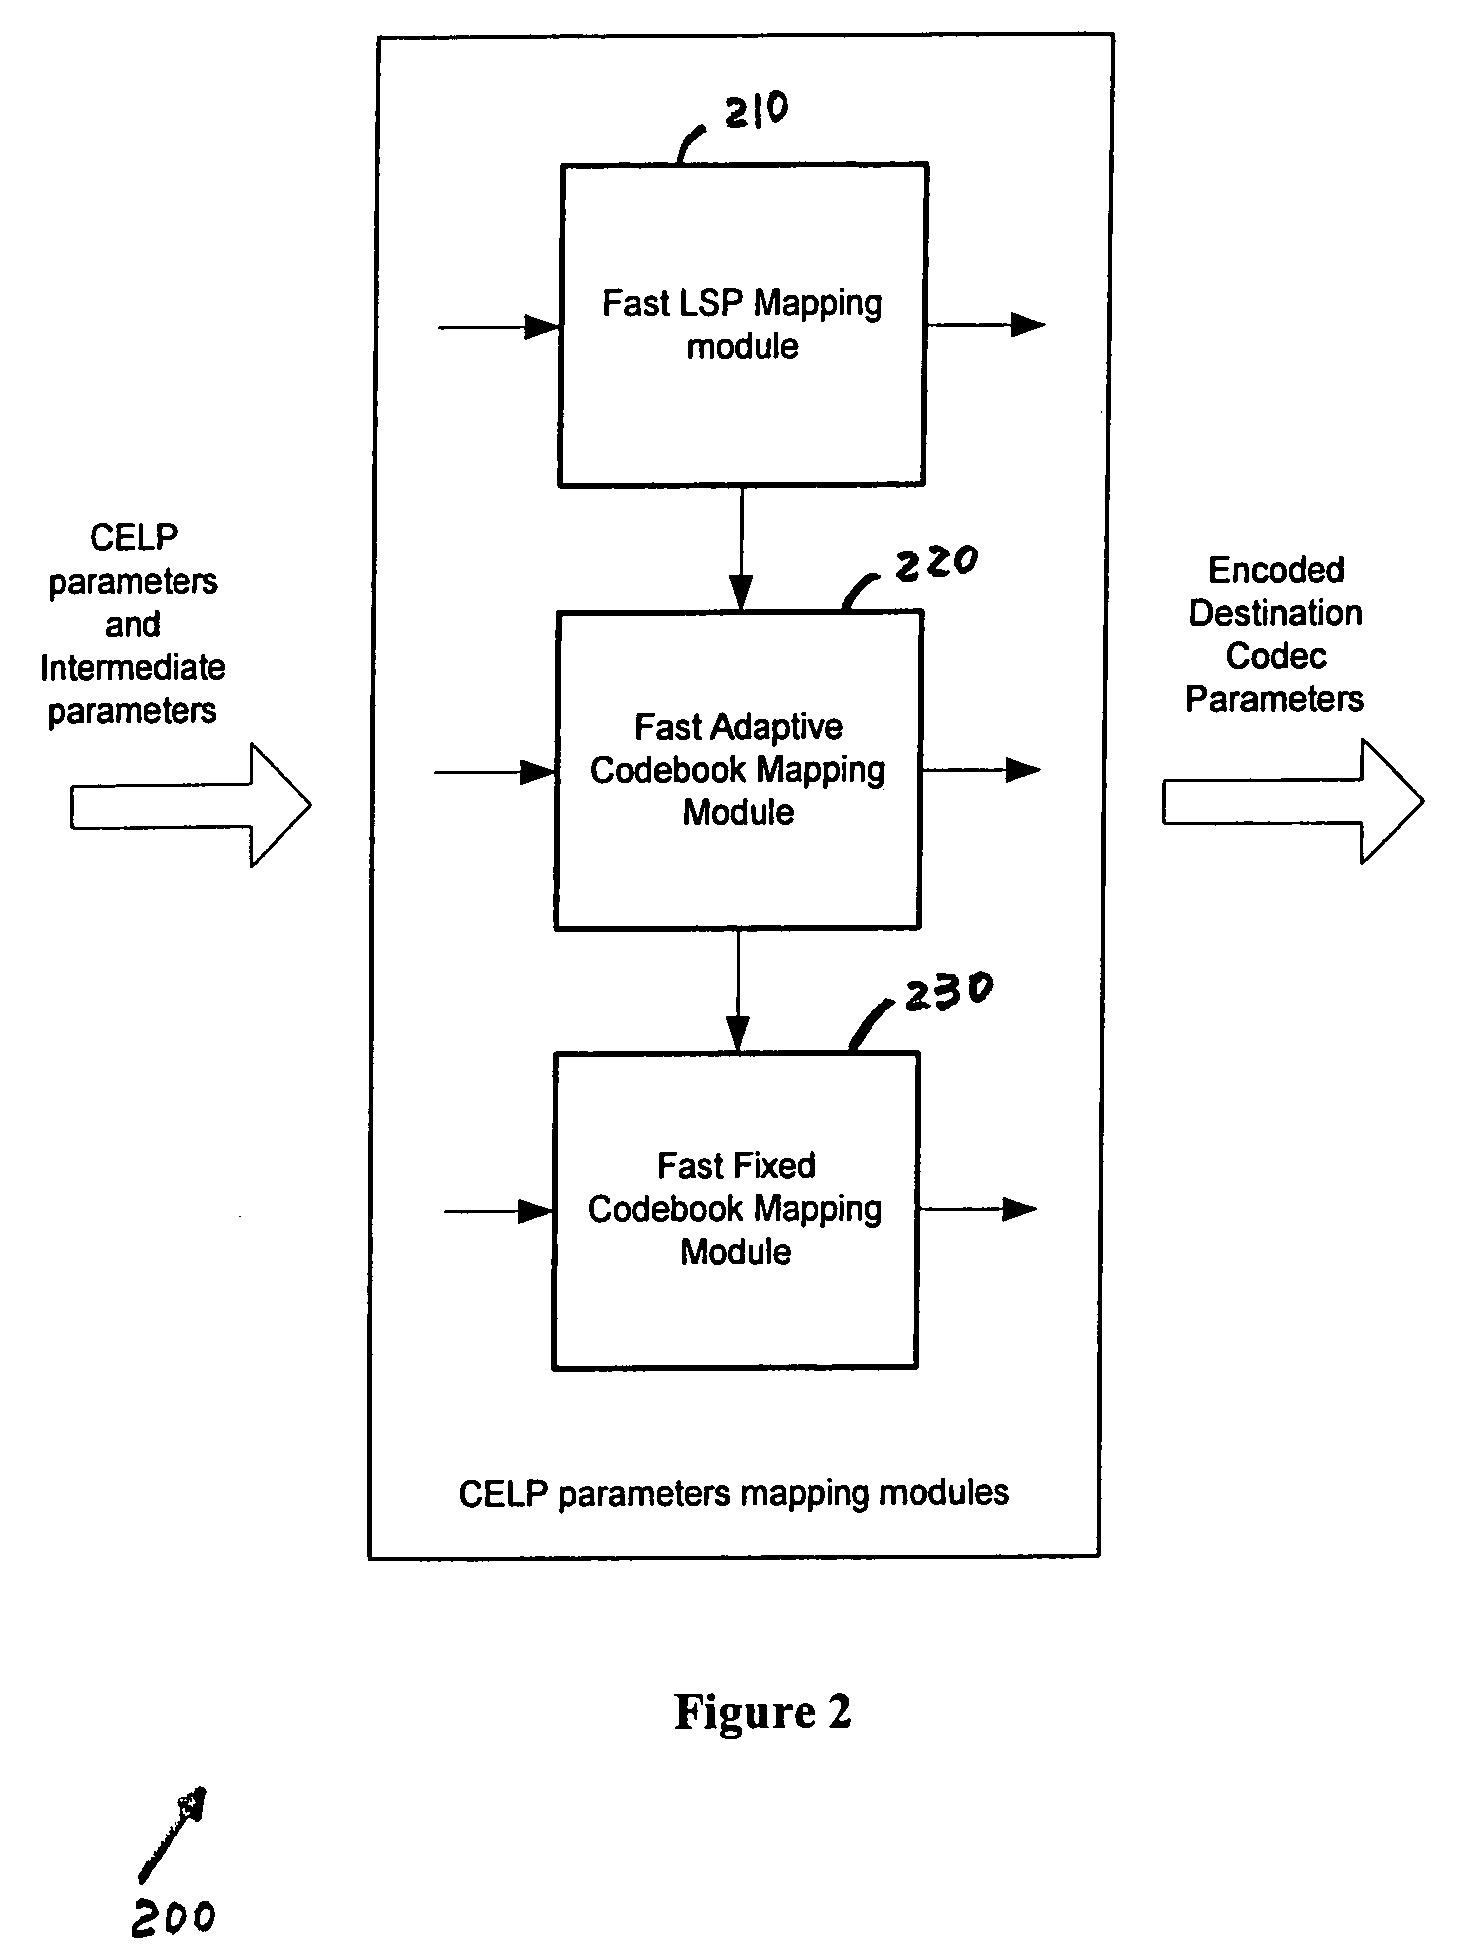 Method and apparatus for fast CELP parameter mapping